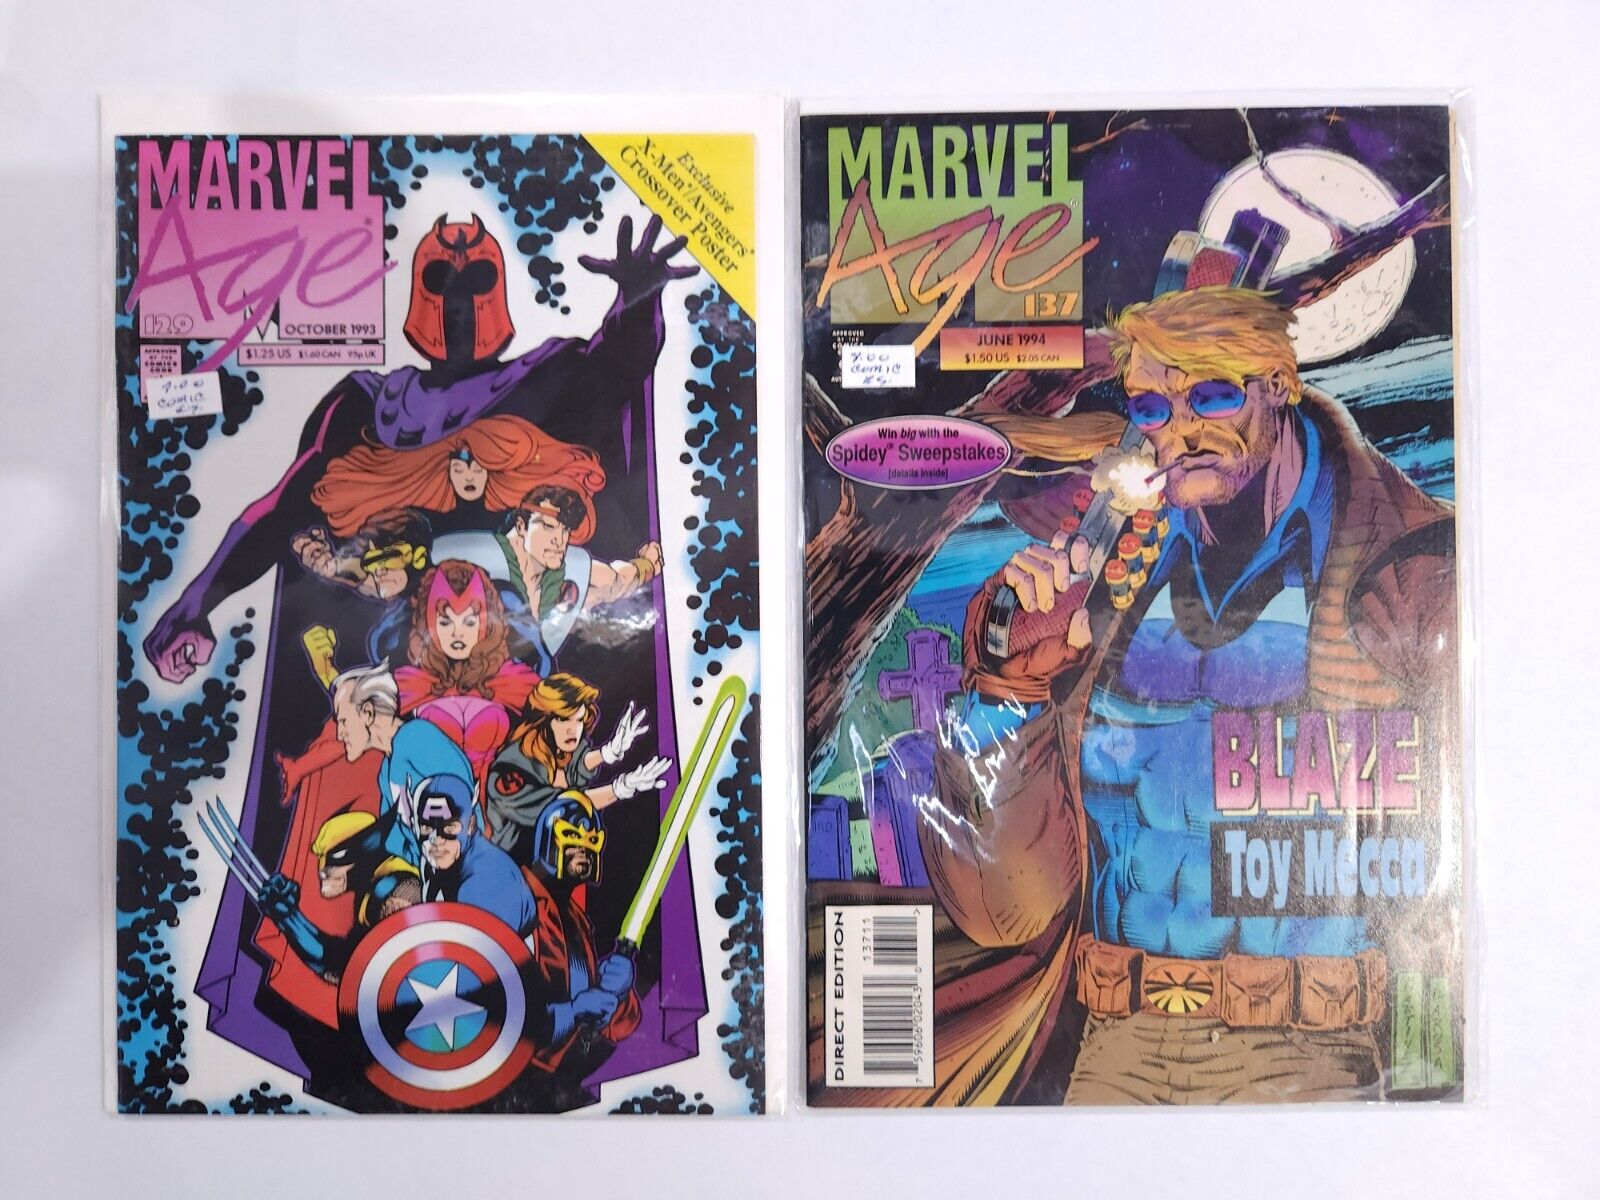 MARVEL AGE #129 1993 ADAM HUGHES COVER W/Poster Included + 137 Lot Comic Book